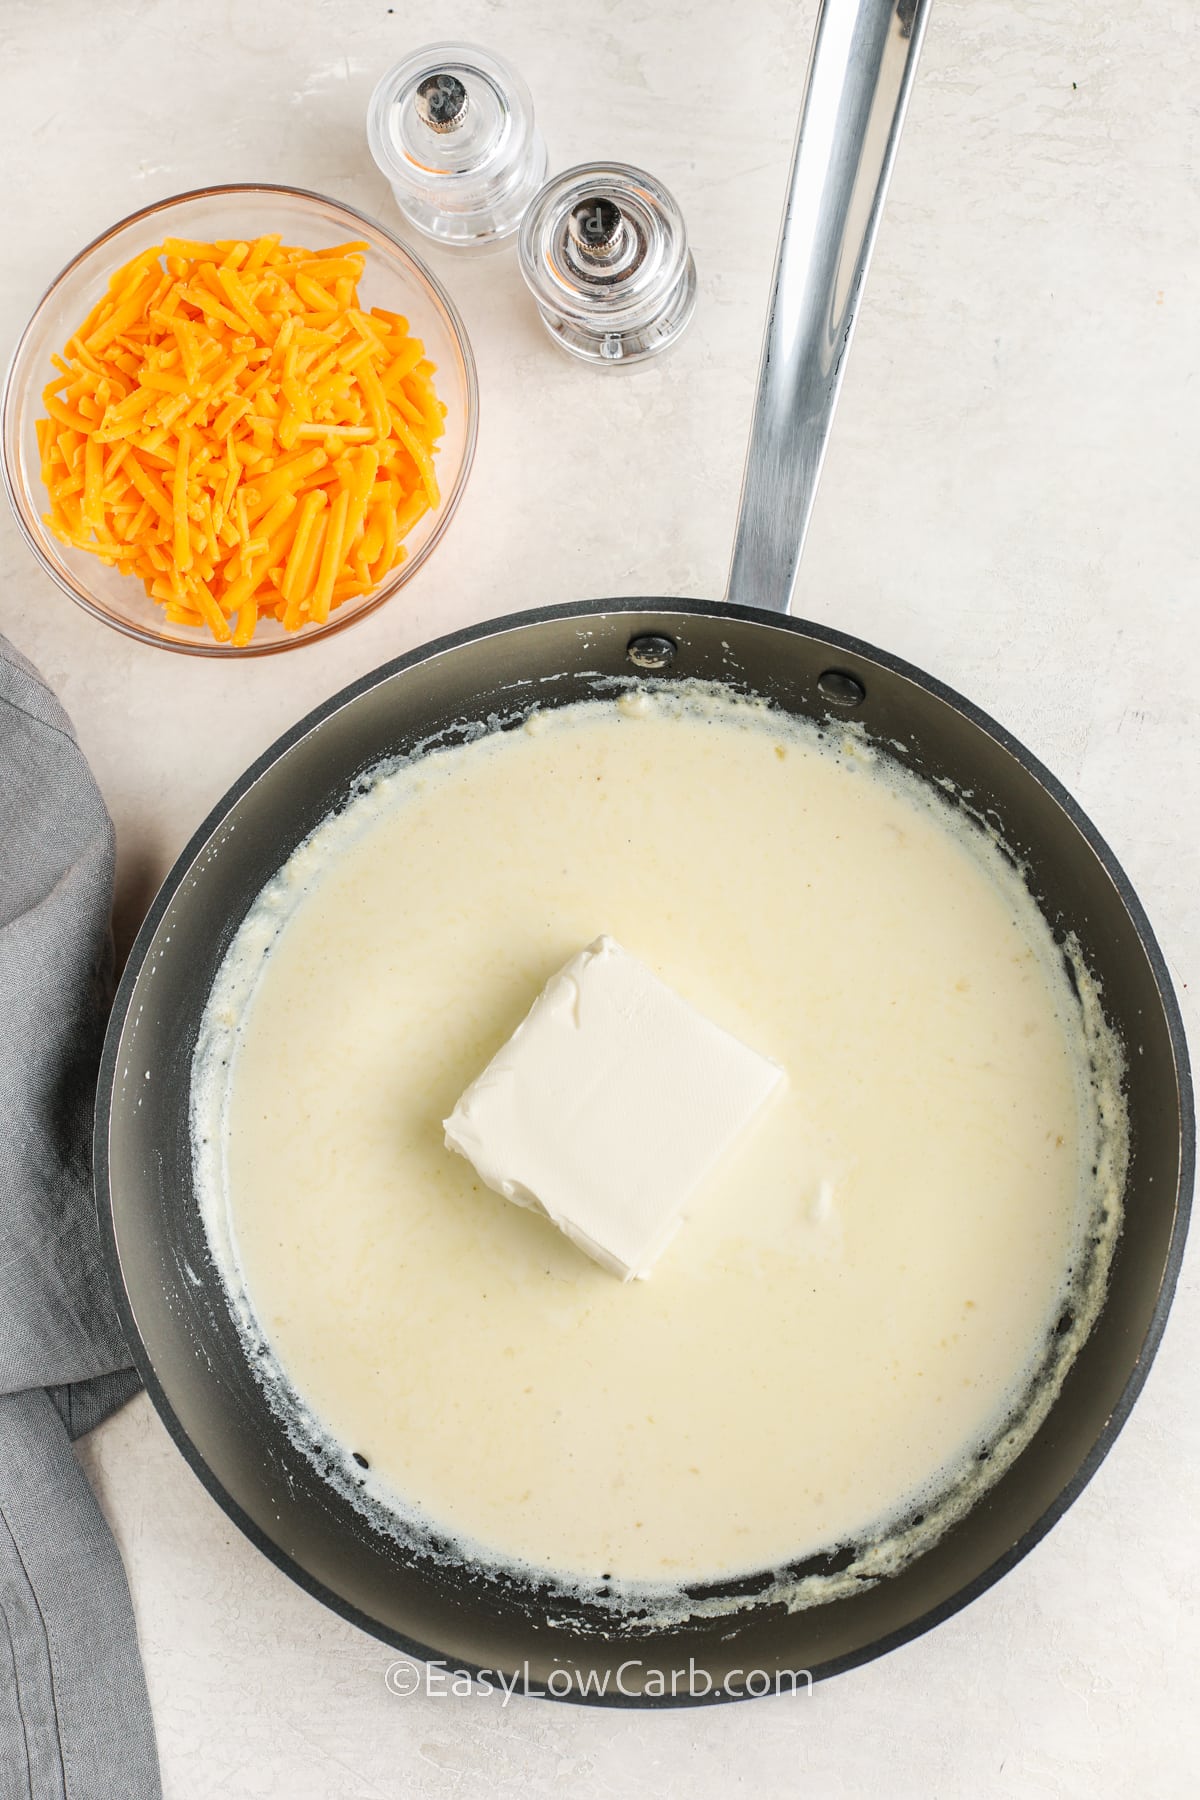 creamy cheese sauce being prepared in a skillet